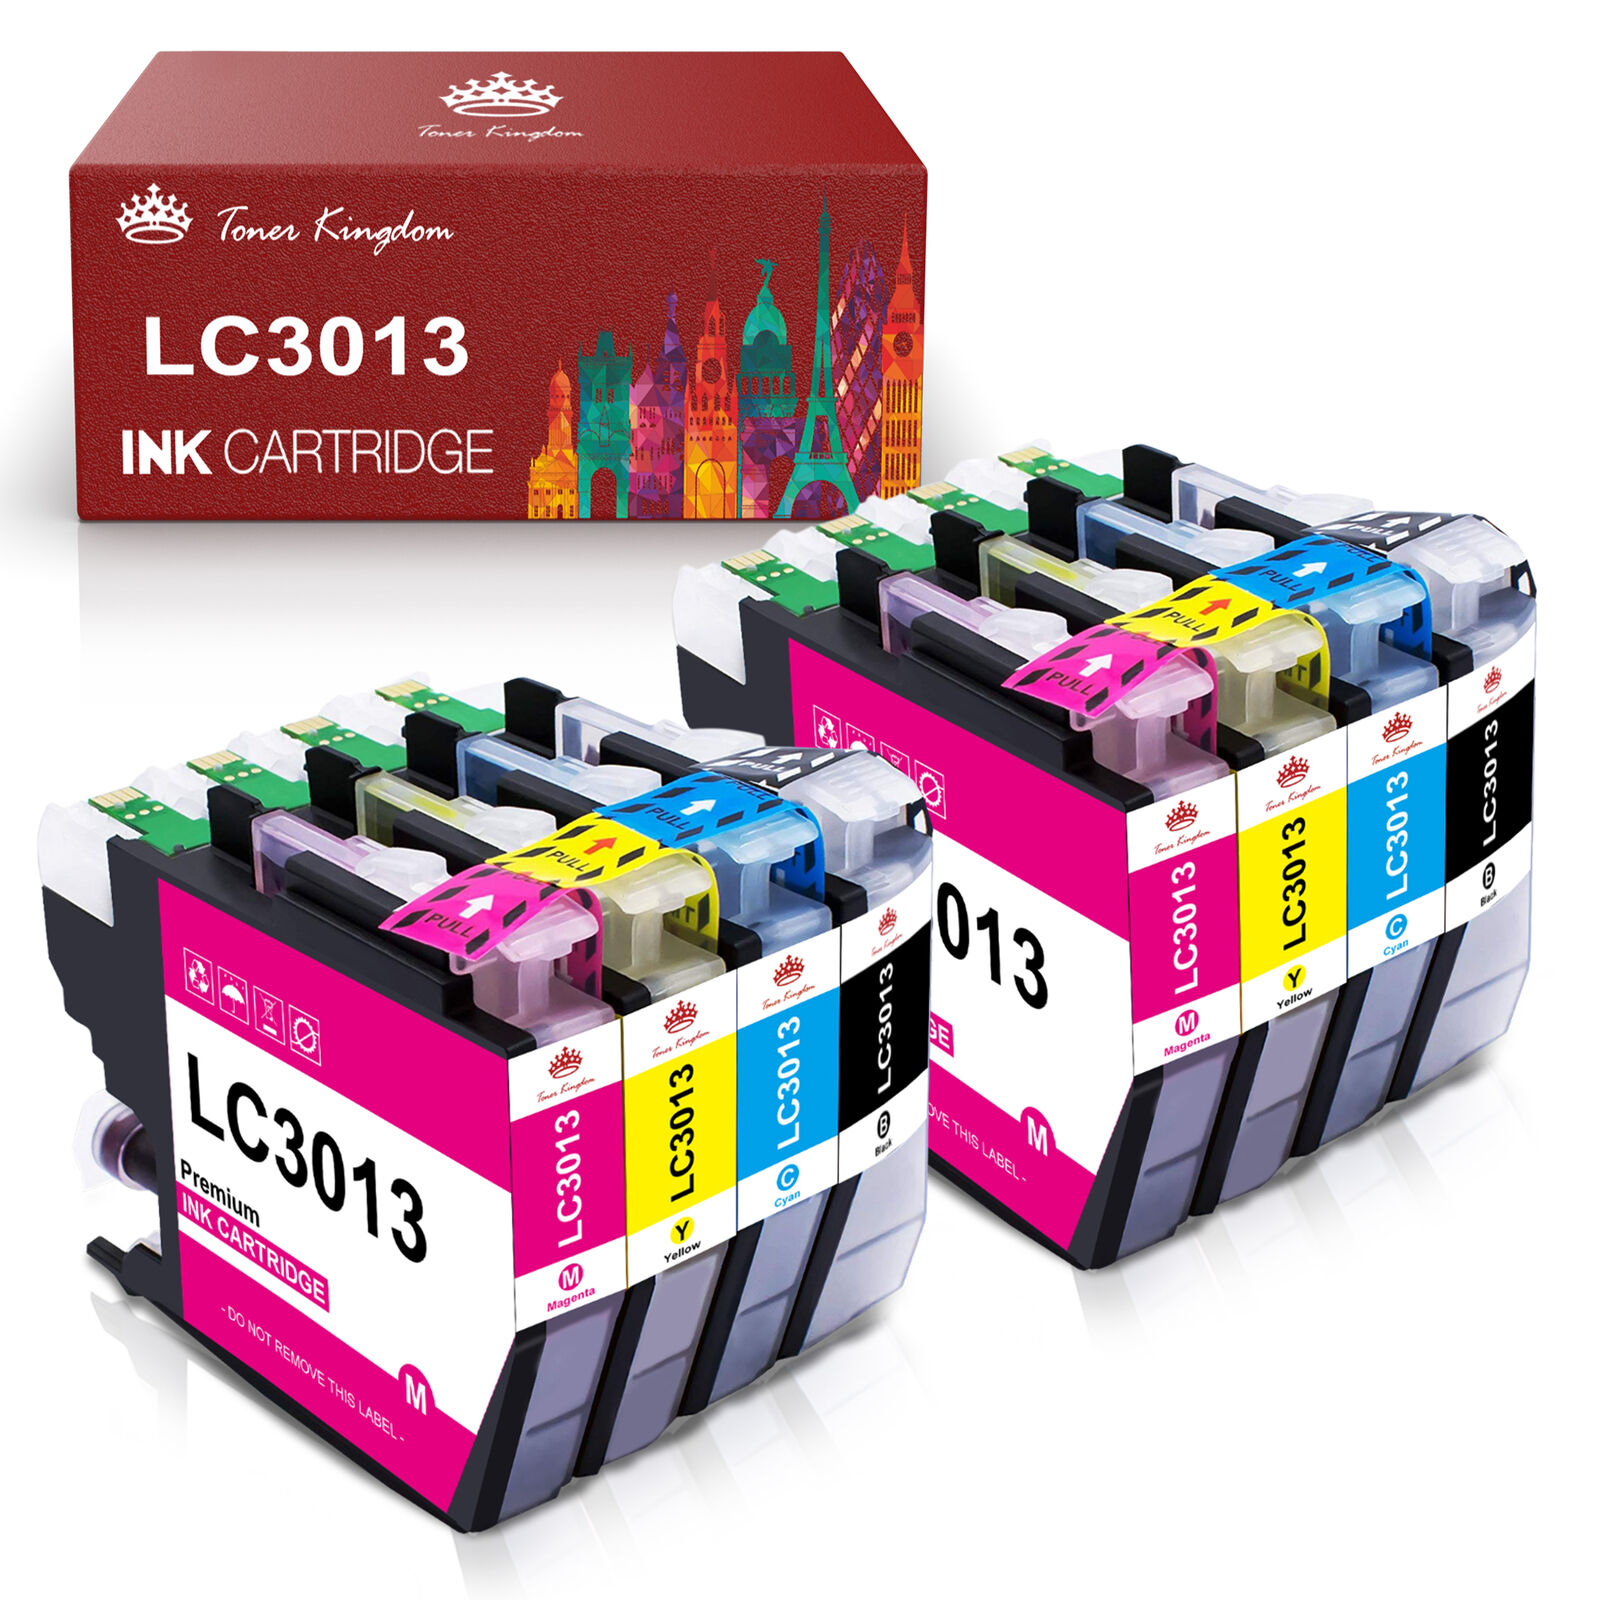 8x Ink compatible for Brother LC3013 LC3011 MFC-J690DW J491DW MFC-J491DW Printer